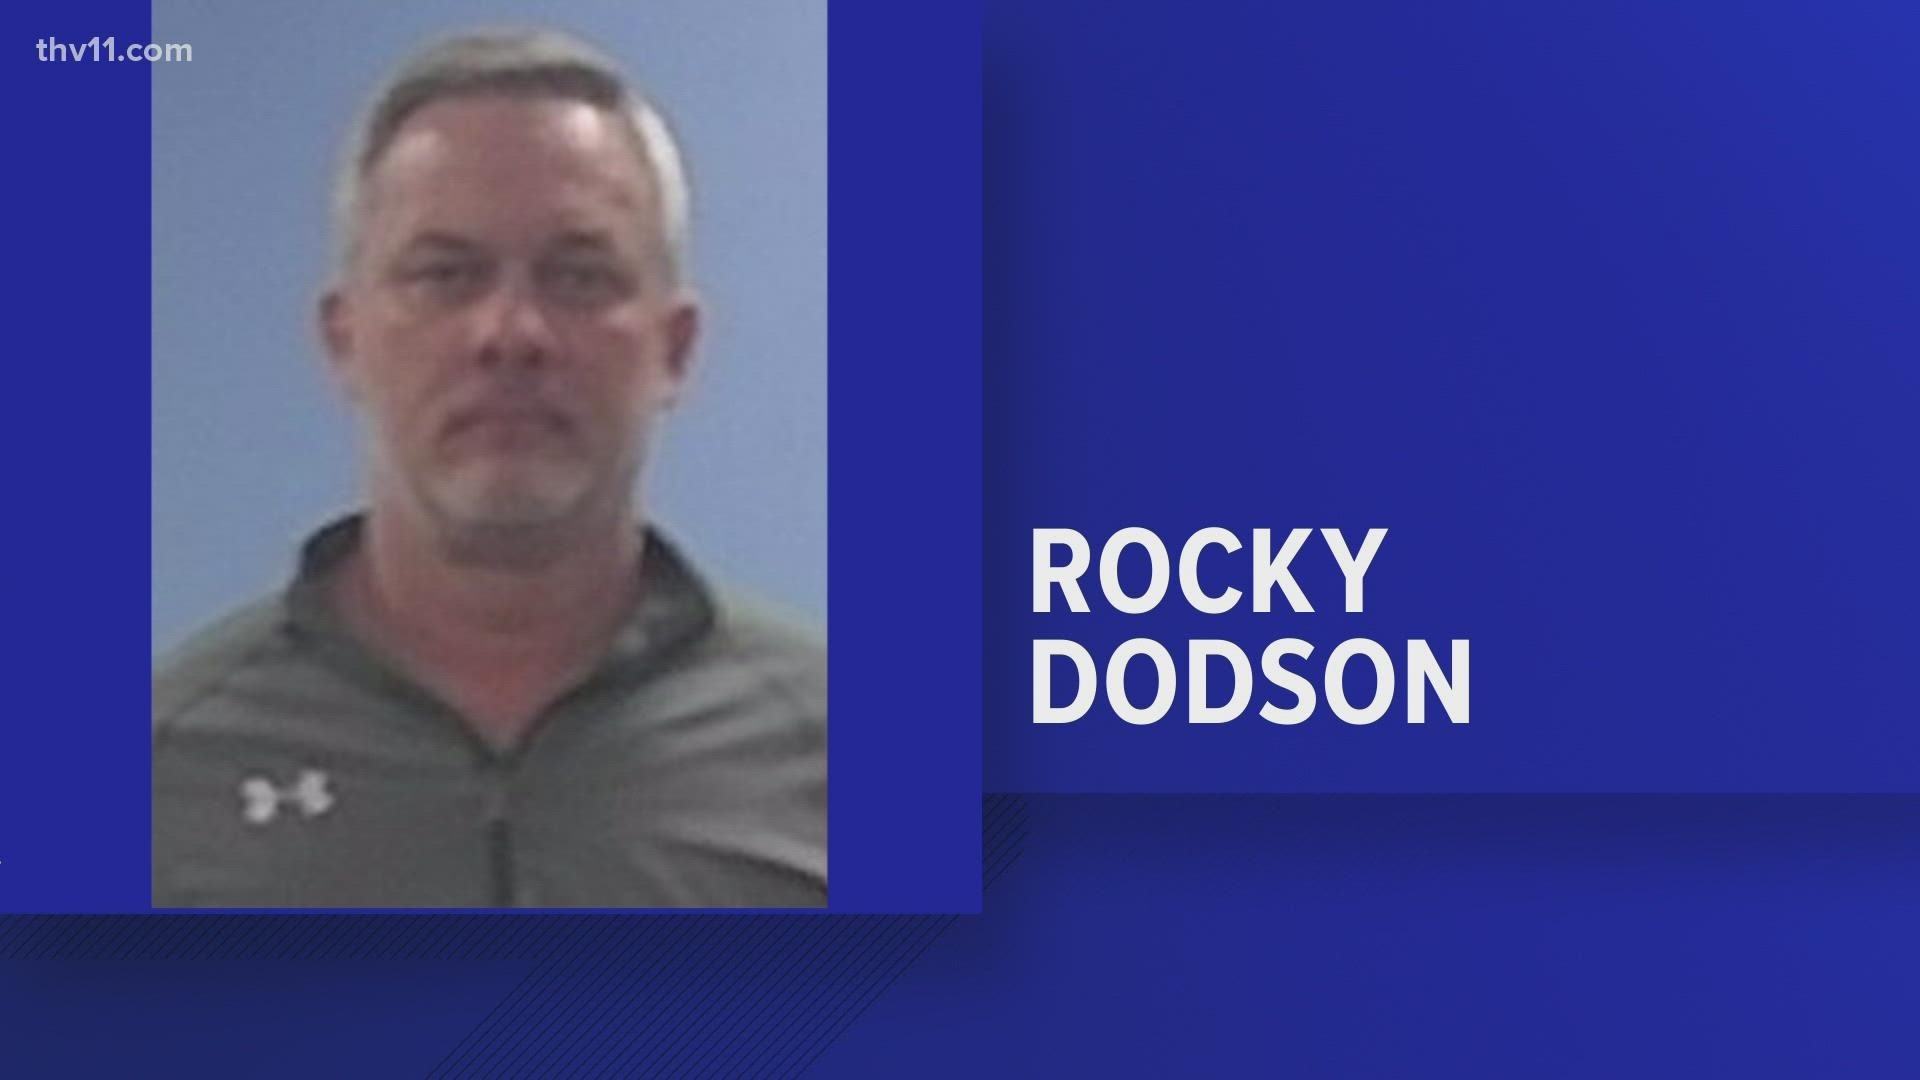 Rocky Dodson has been charged with second degree murder for the death of his wife Amanda Dodson, who suffered a severe throat injury.